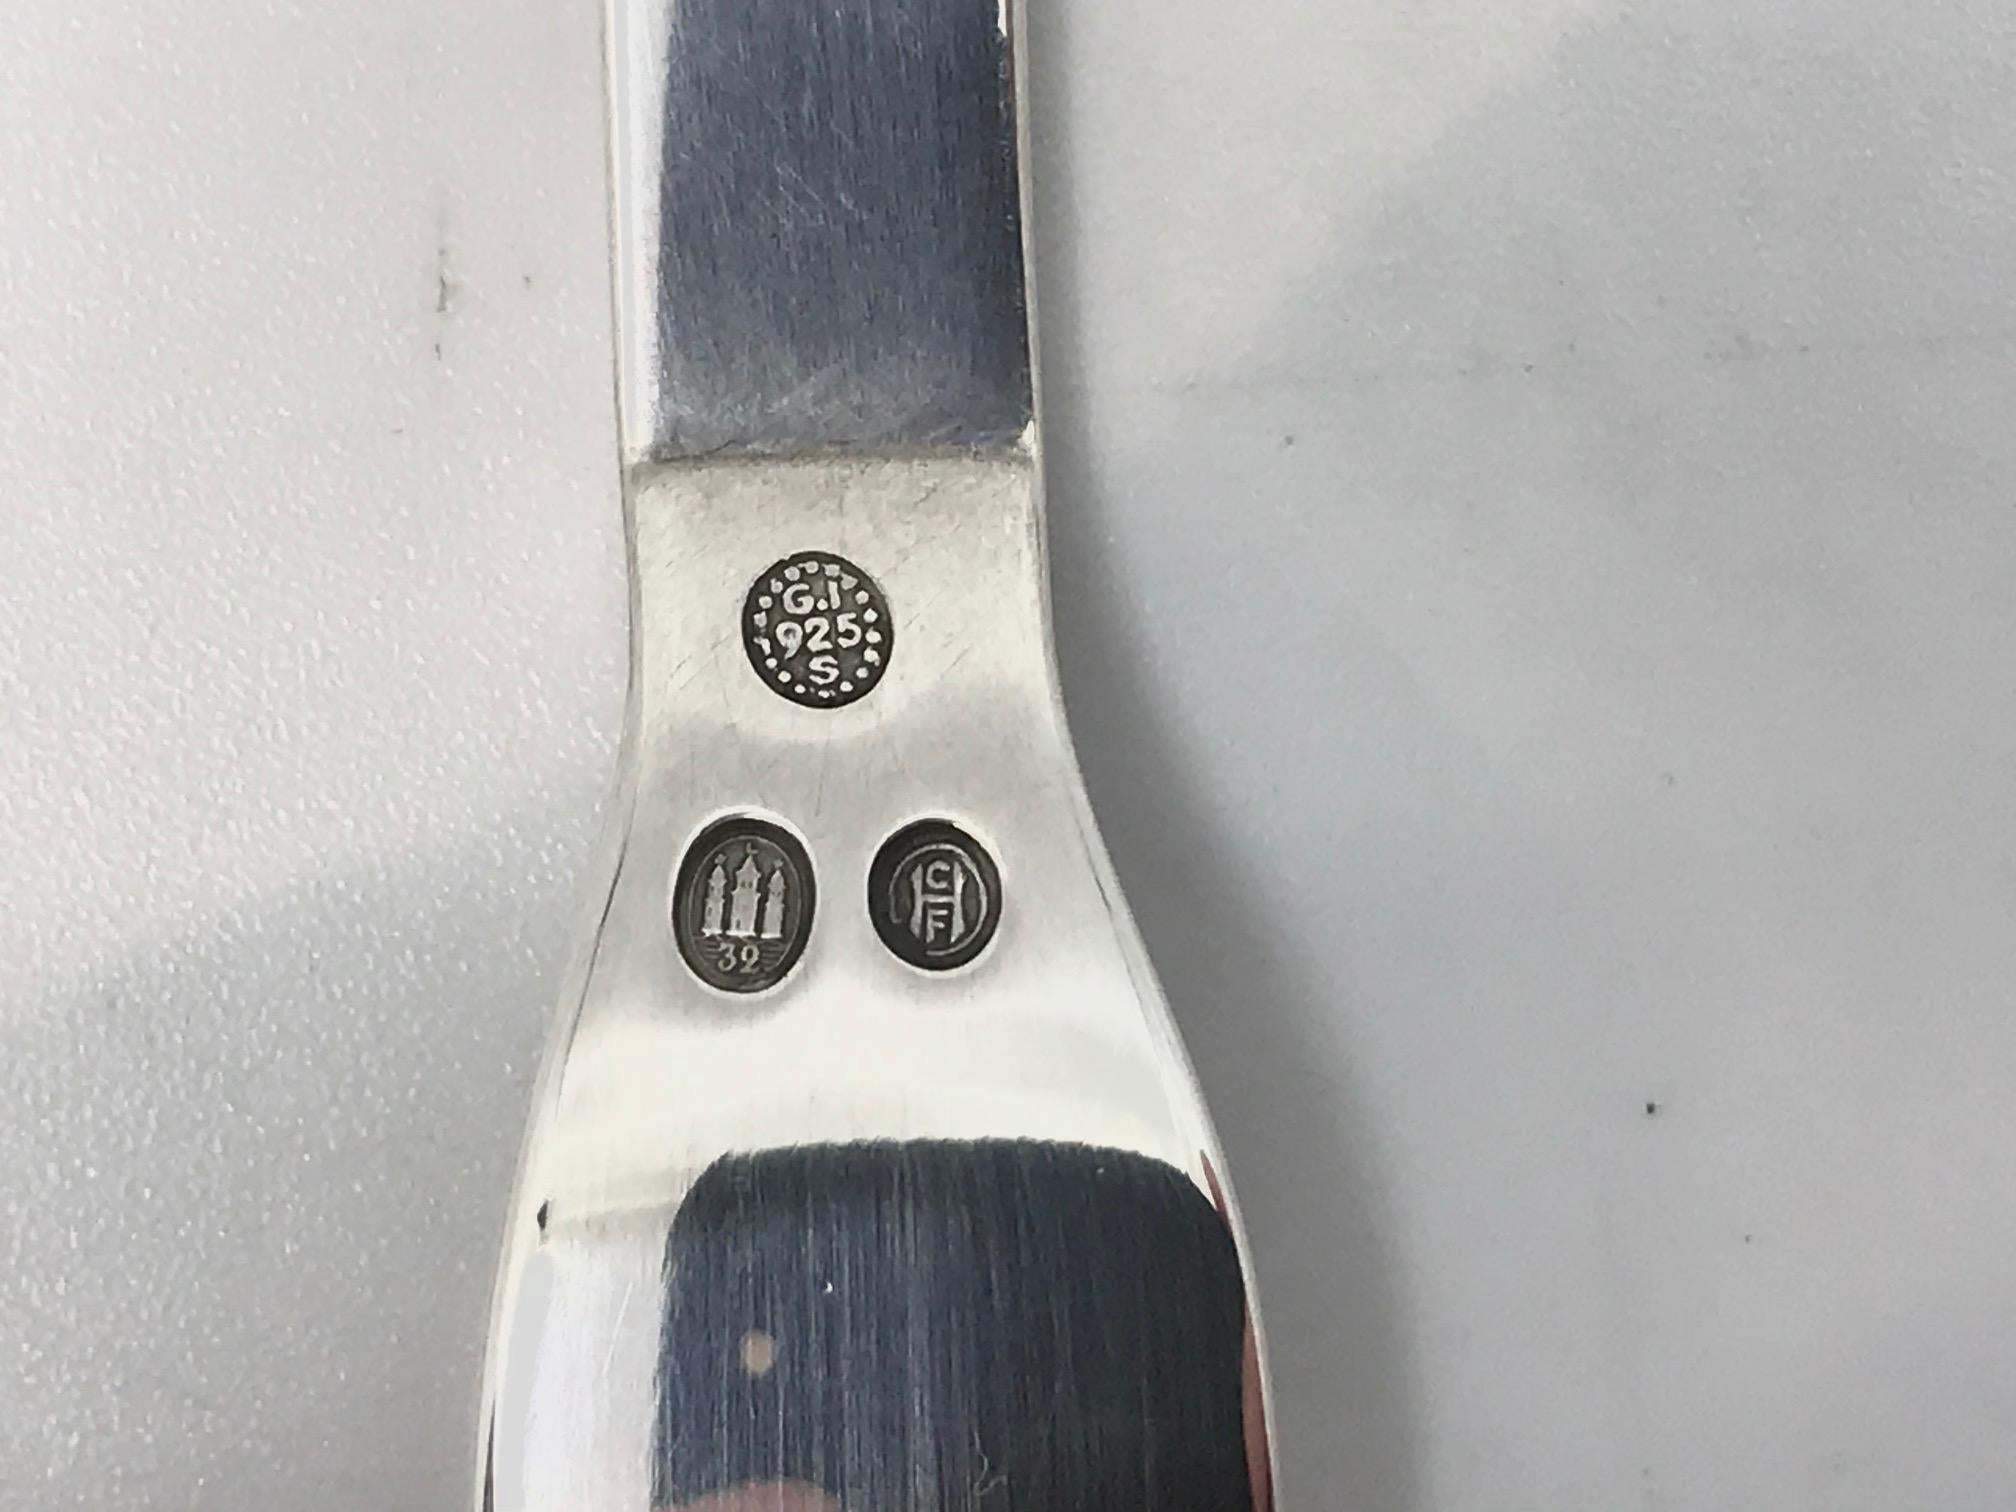 Sterling silver Georg Jensen cold cuts fork, item 144 in the Pyramid pattern, design #15 by Harald Nielsen from 1926.

Additional information:
Material: Sterling silver
Style: Art Deco
Hallmarks: With post 1944 Georg Jensen hallmark, made in